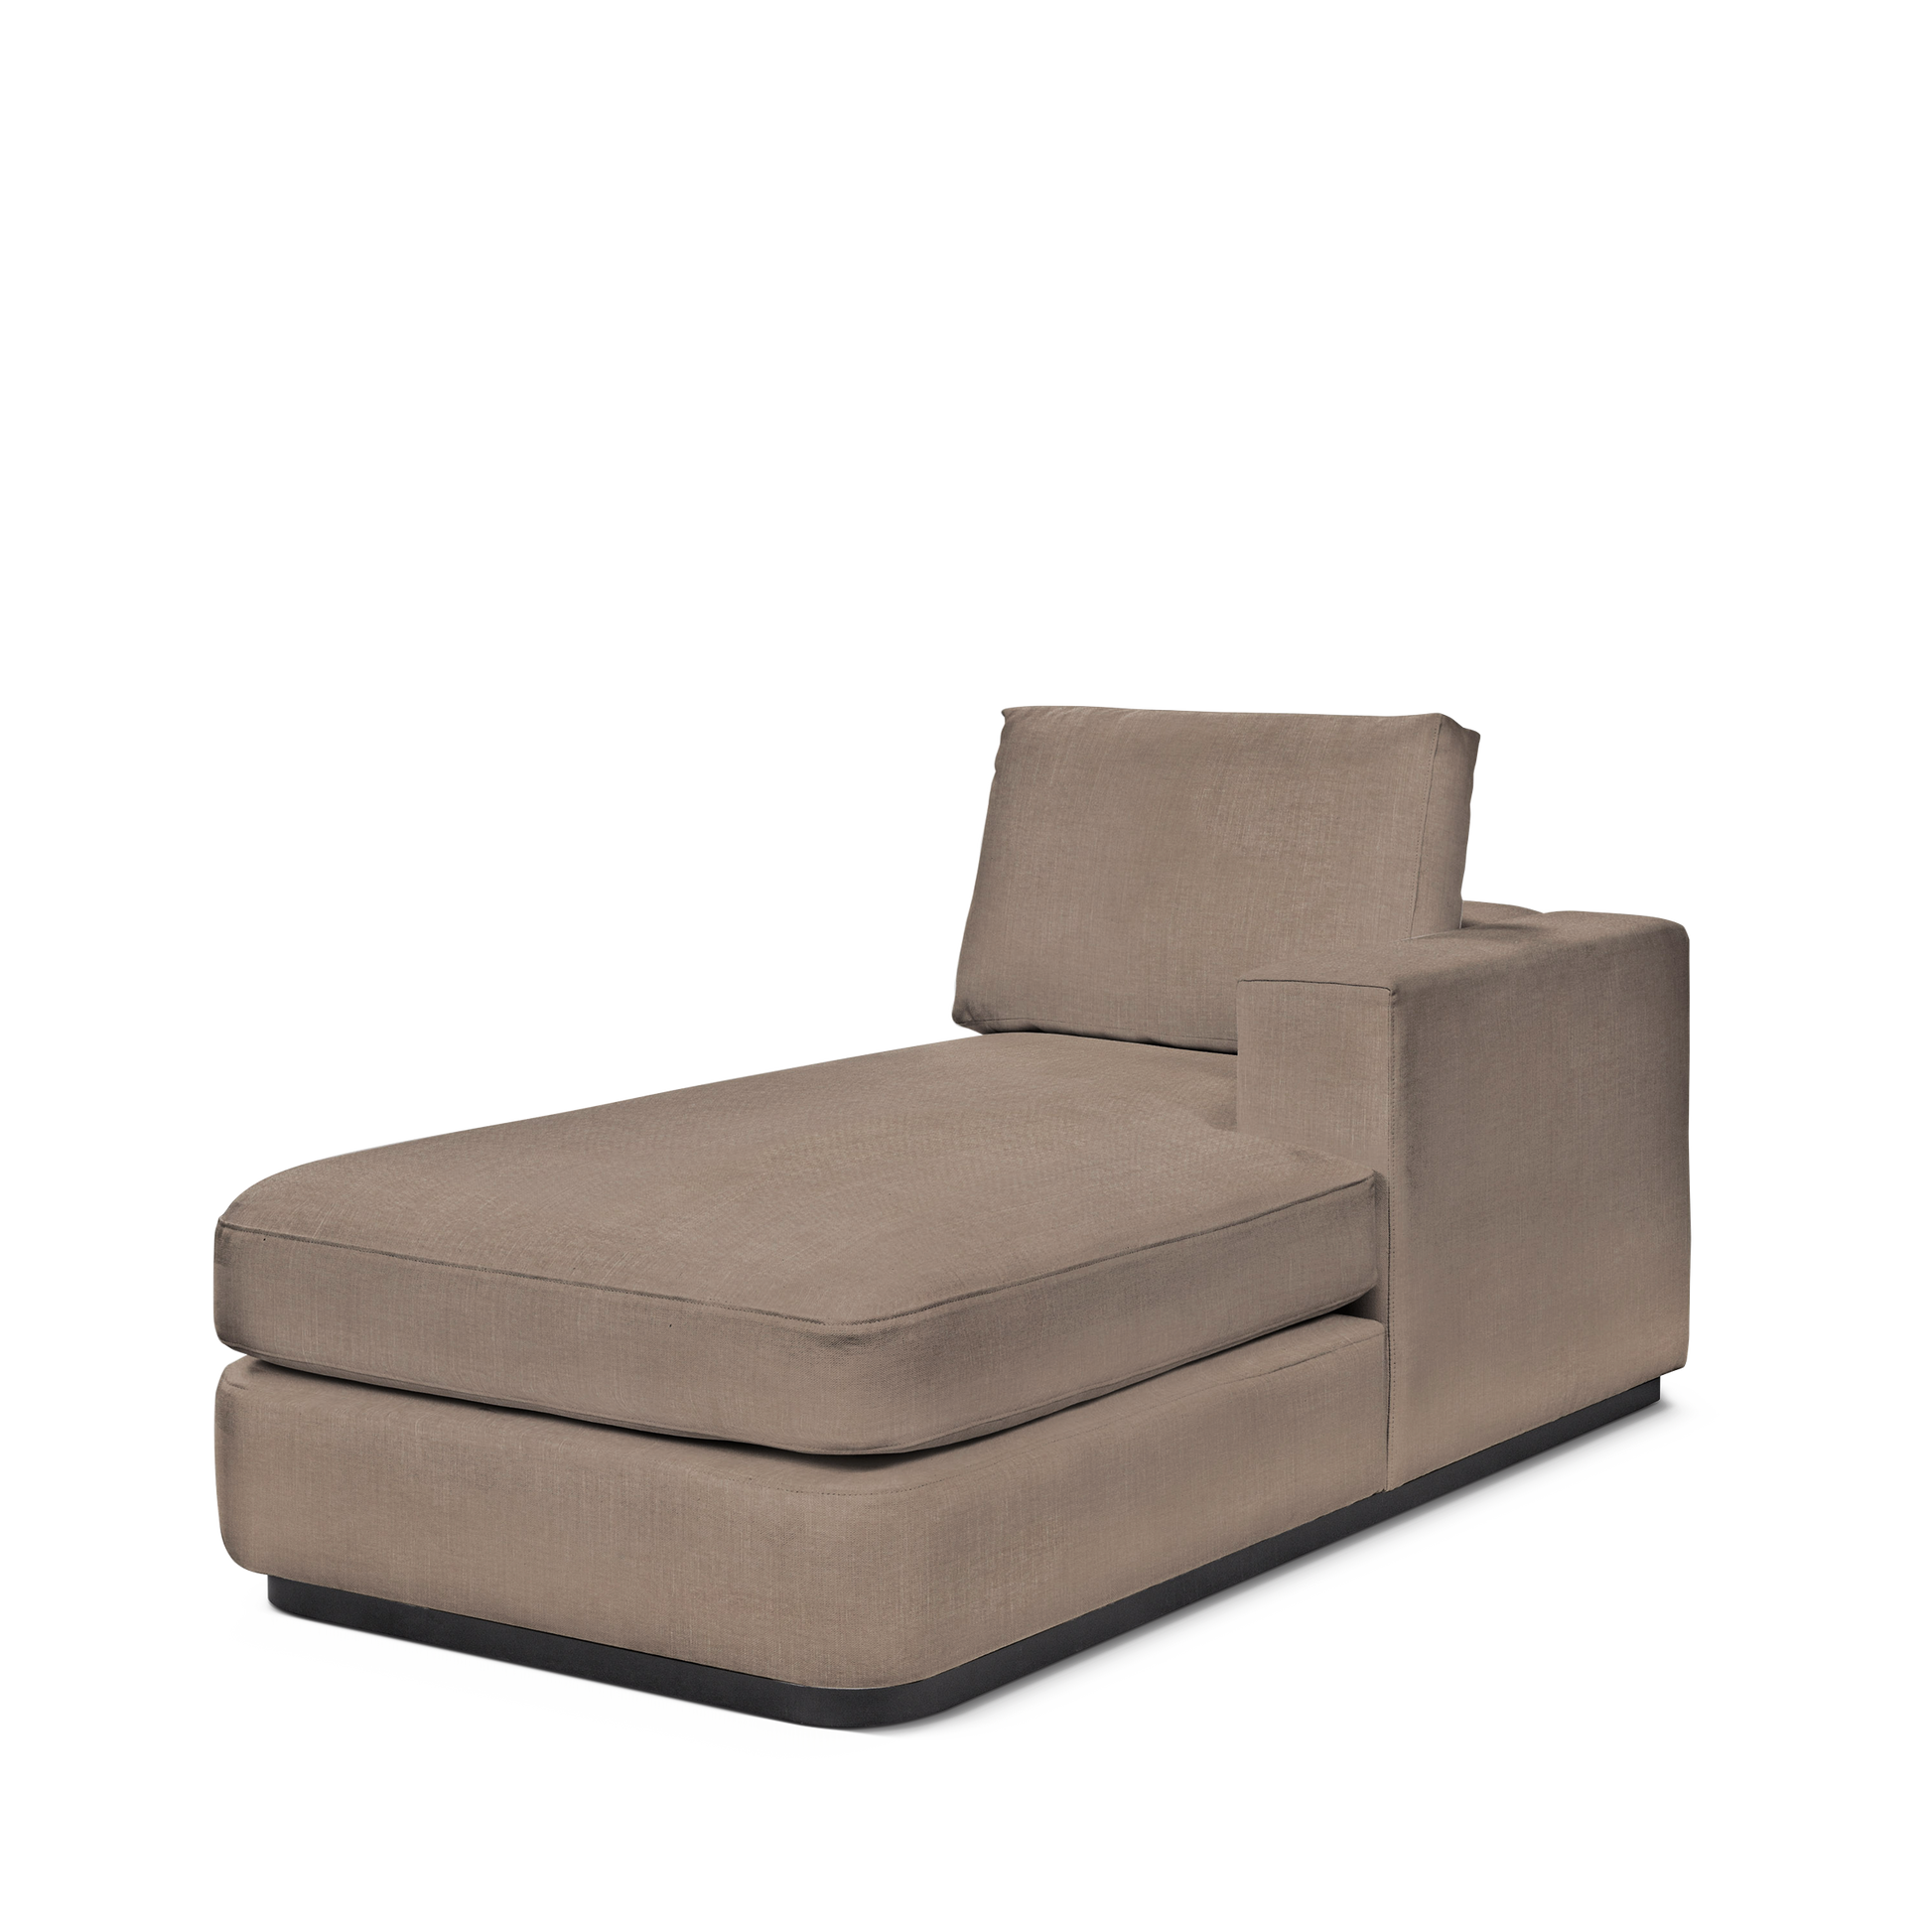 ATLAS 90 Lounge Bed arm rest right with linara brown textile